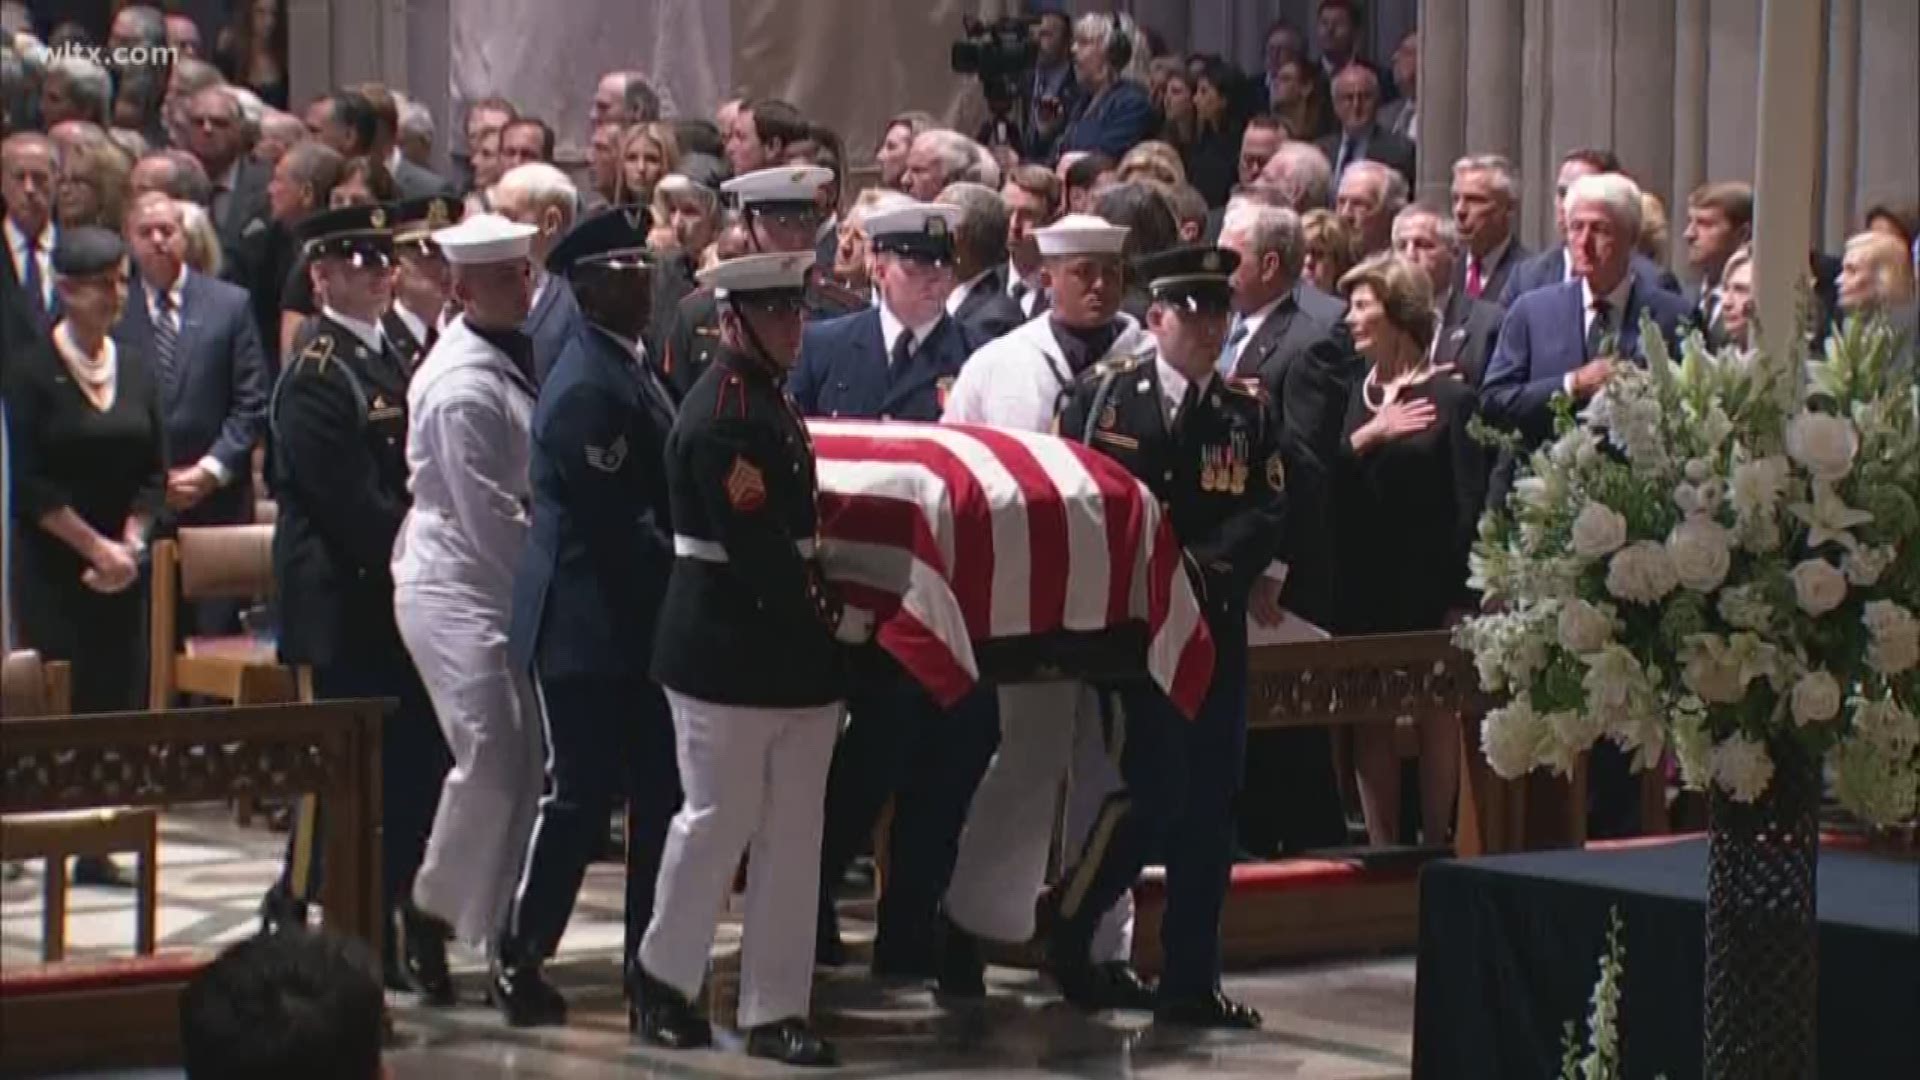 Sen. John McCain's casket was slowly carried into the National Cathedral in Washington, D.C. on September 1, 2018 for his funeral.